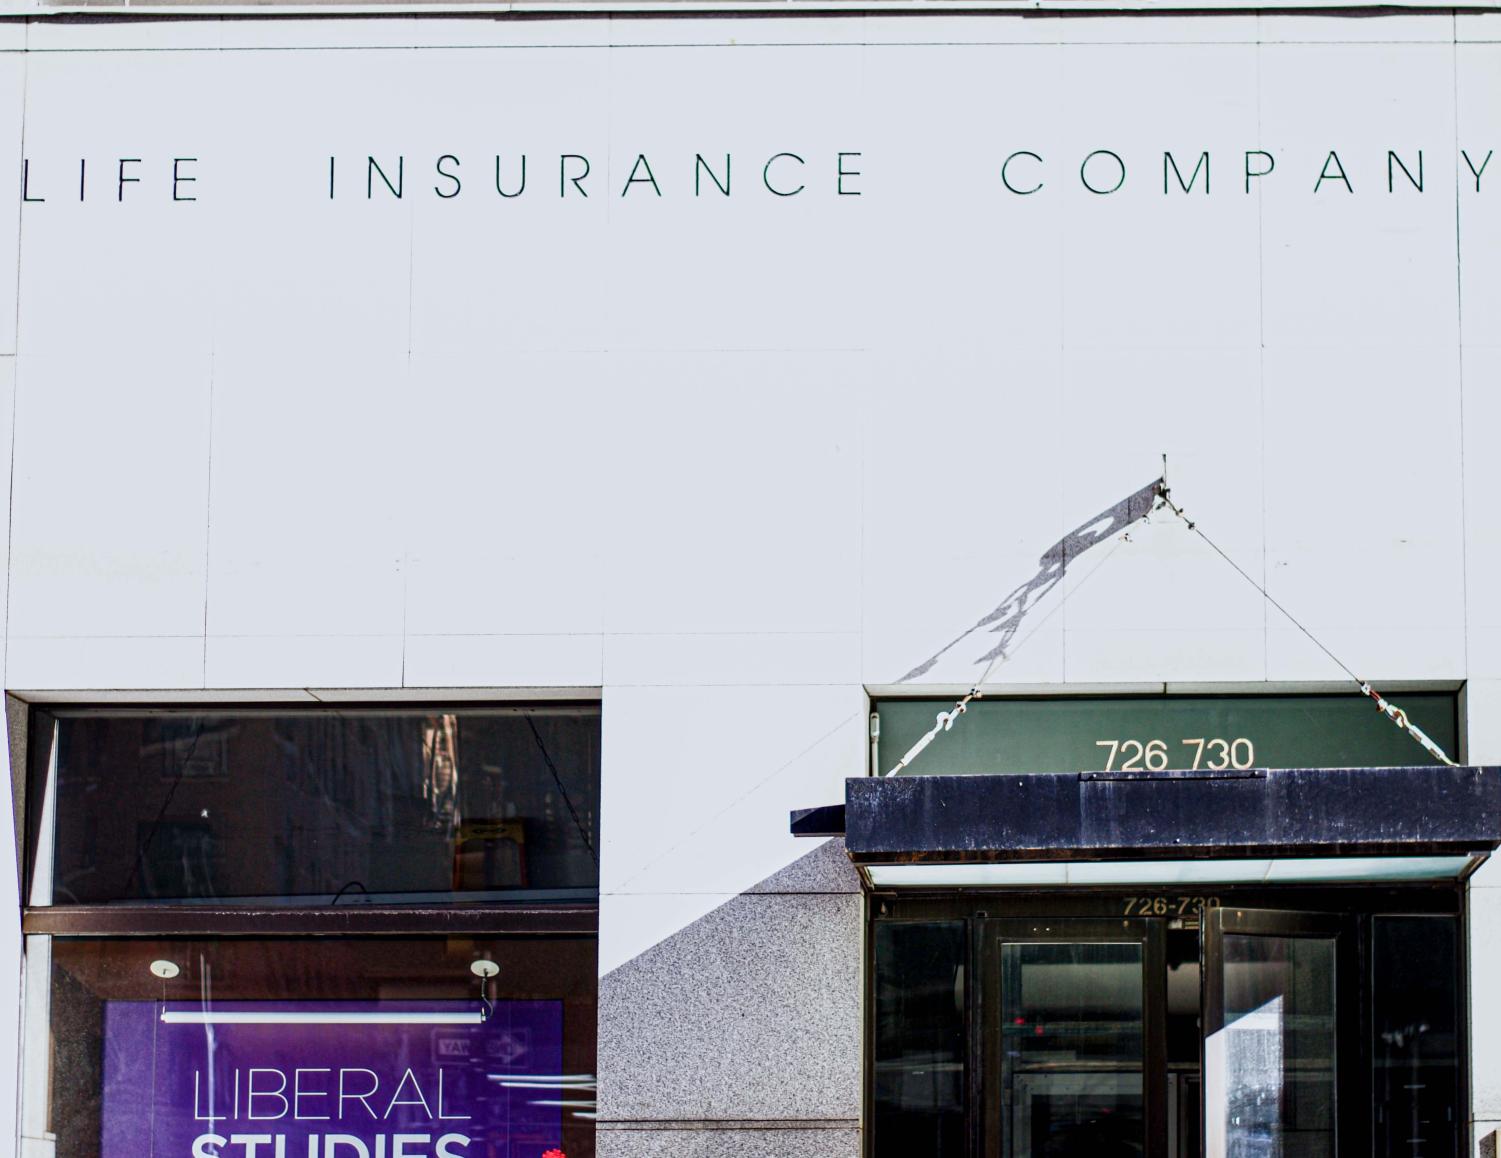 The gray stone facade of 726 Broadway with a green awning hanging above the entrance. Toward the top of the building, the text “Life Insurance Company” is etched into the stone.